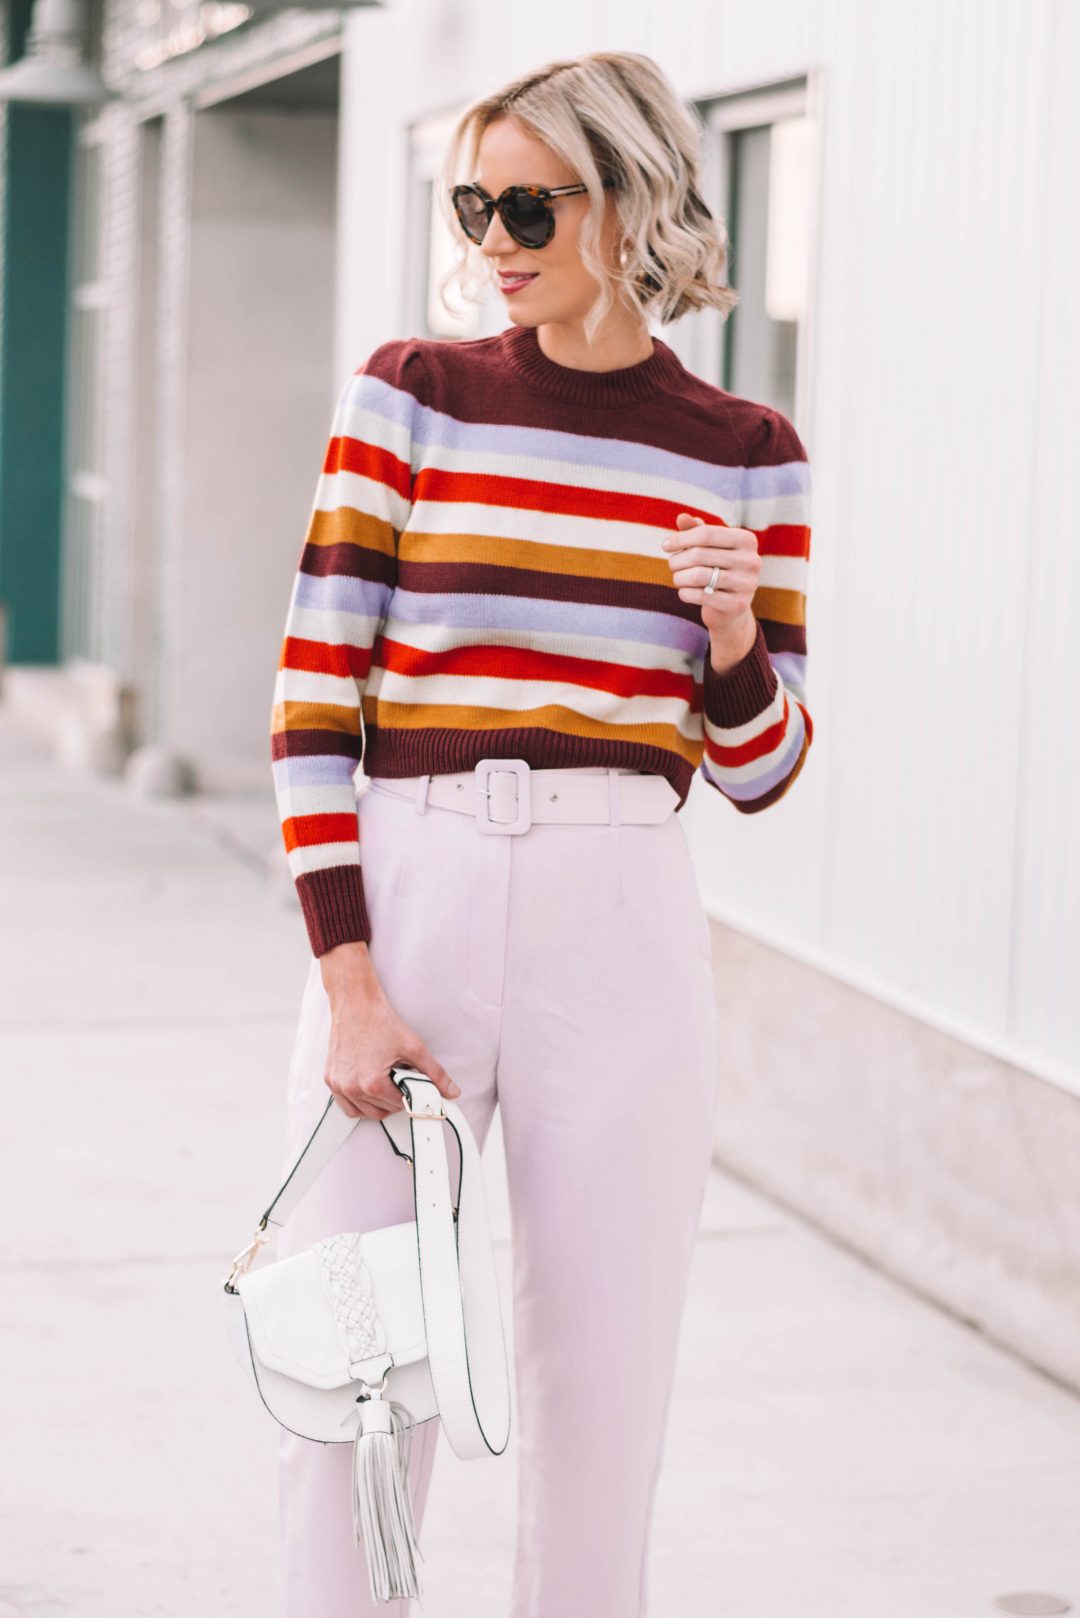 80s Inspired - Fall Trends - Straight A Style